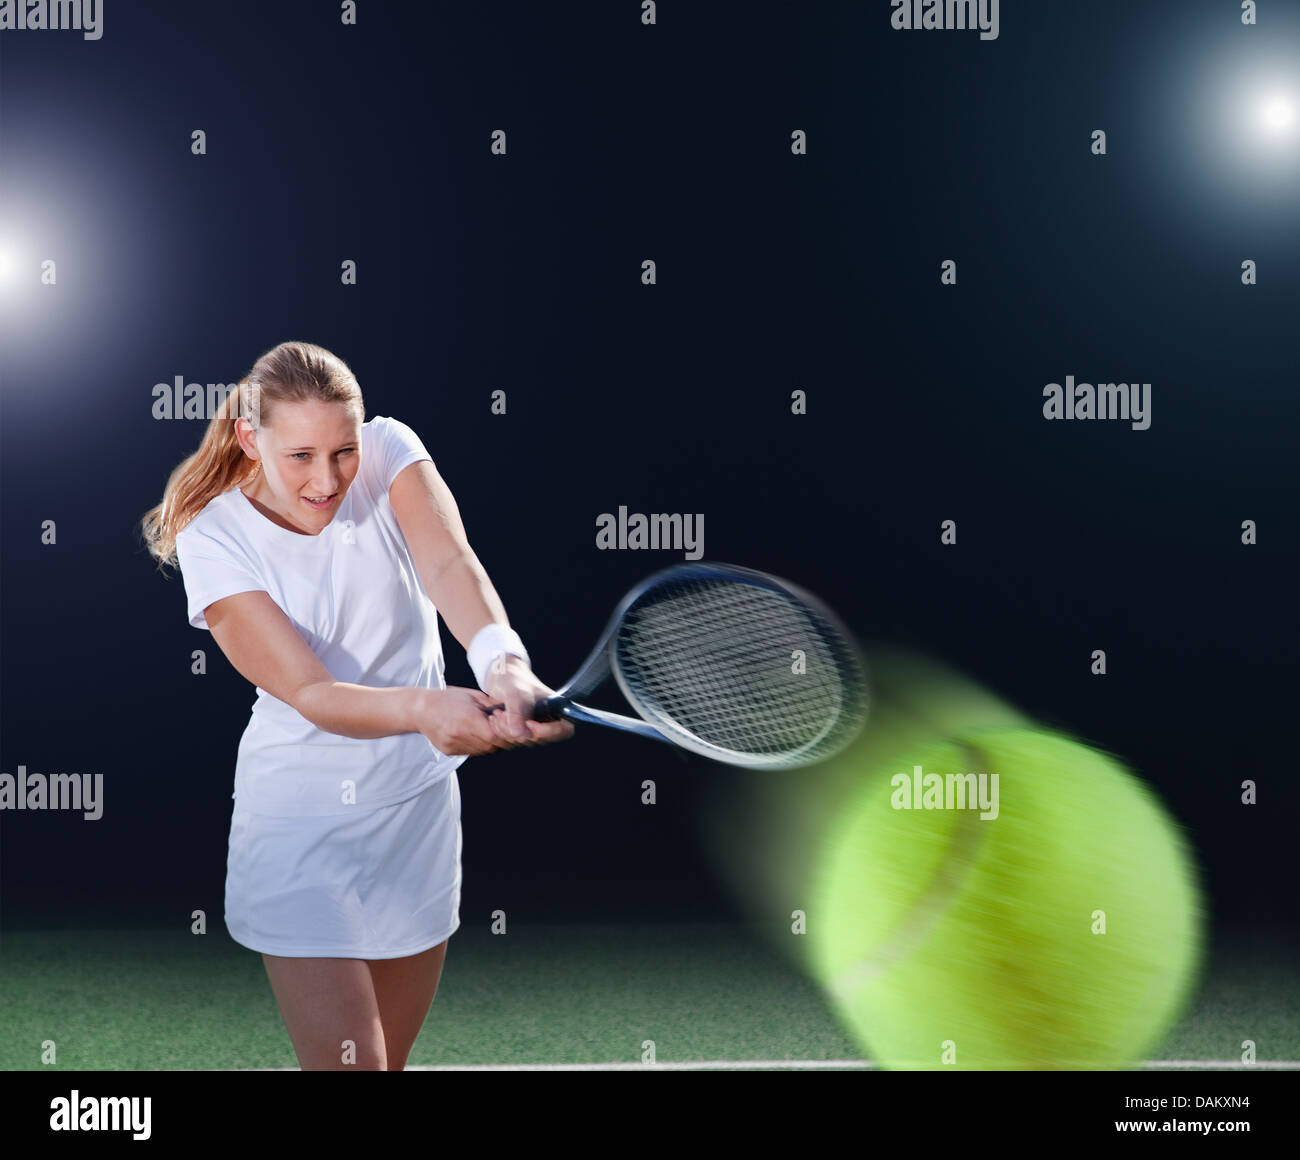 Tennis player hitting ball on court Banque D'Images